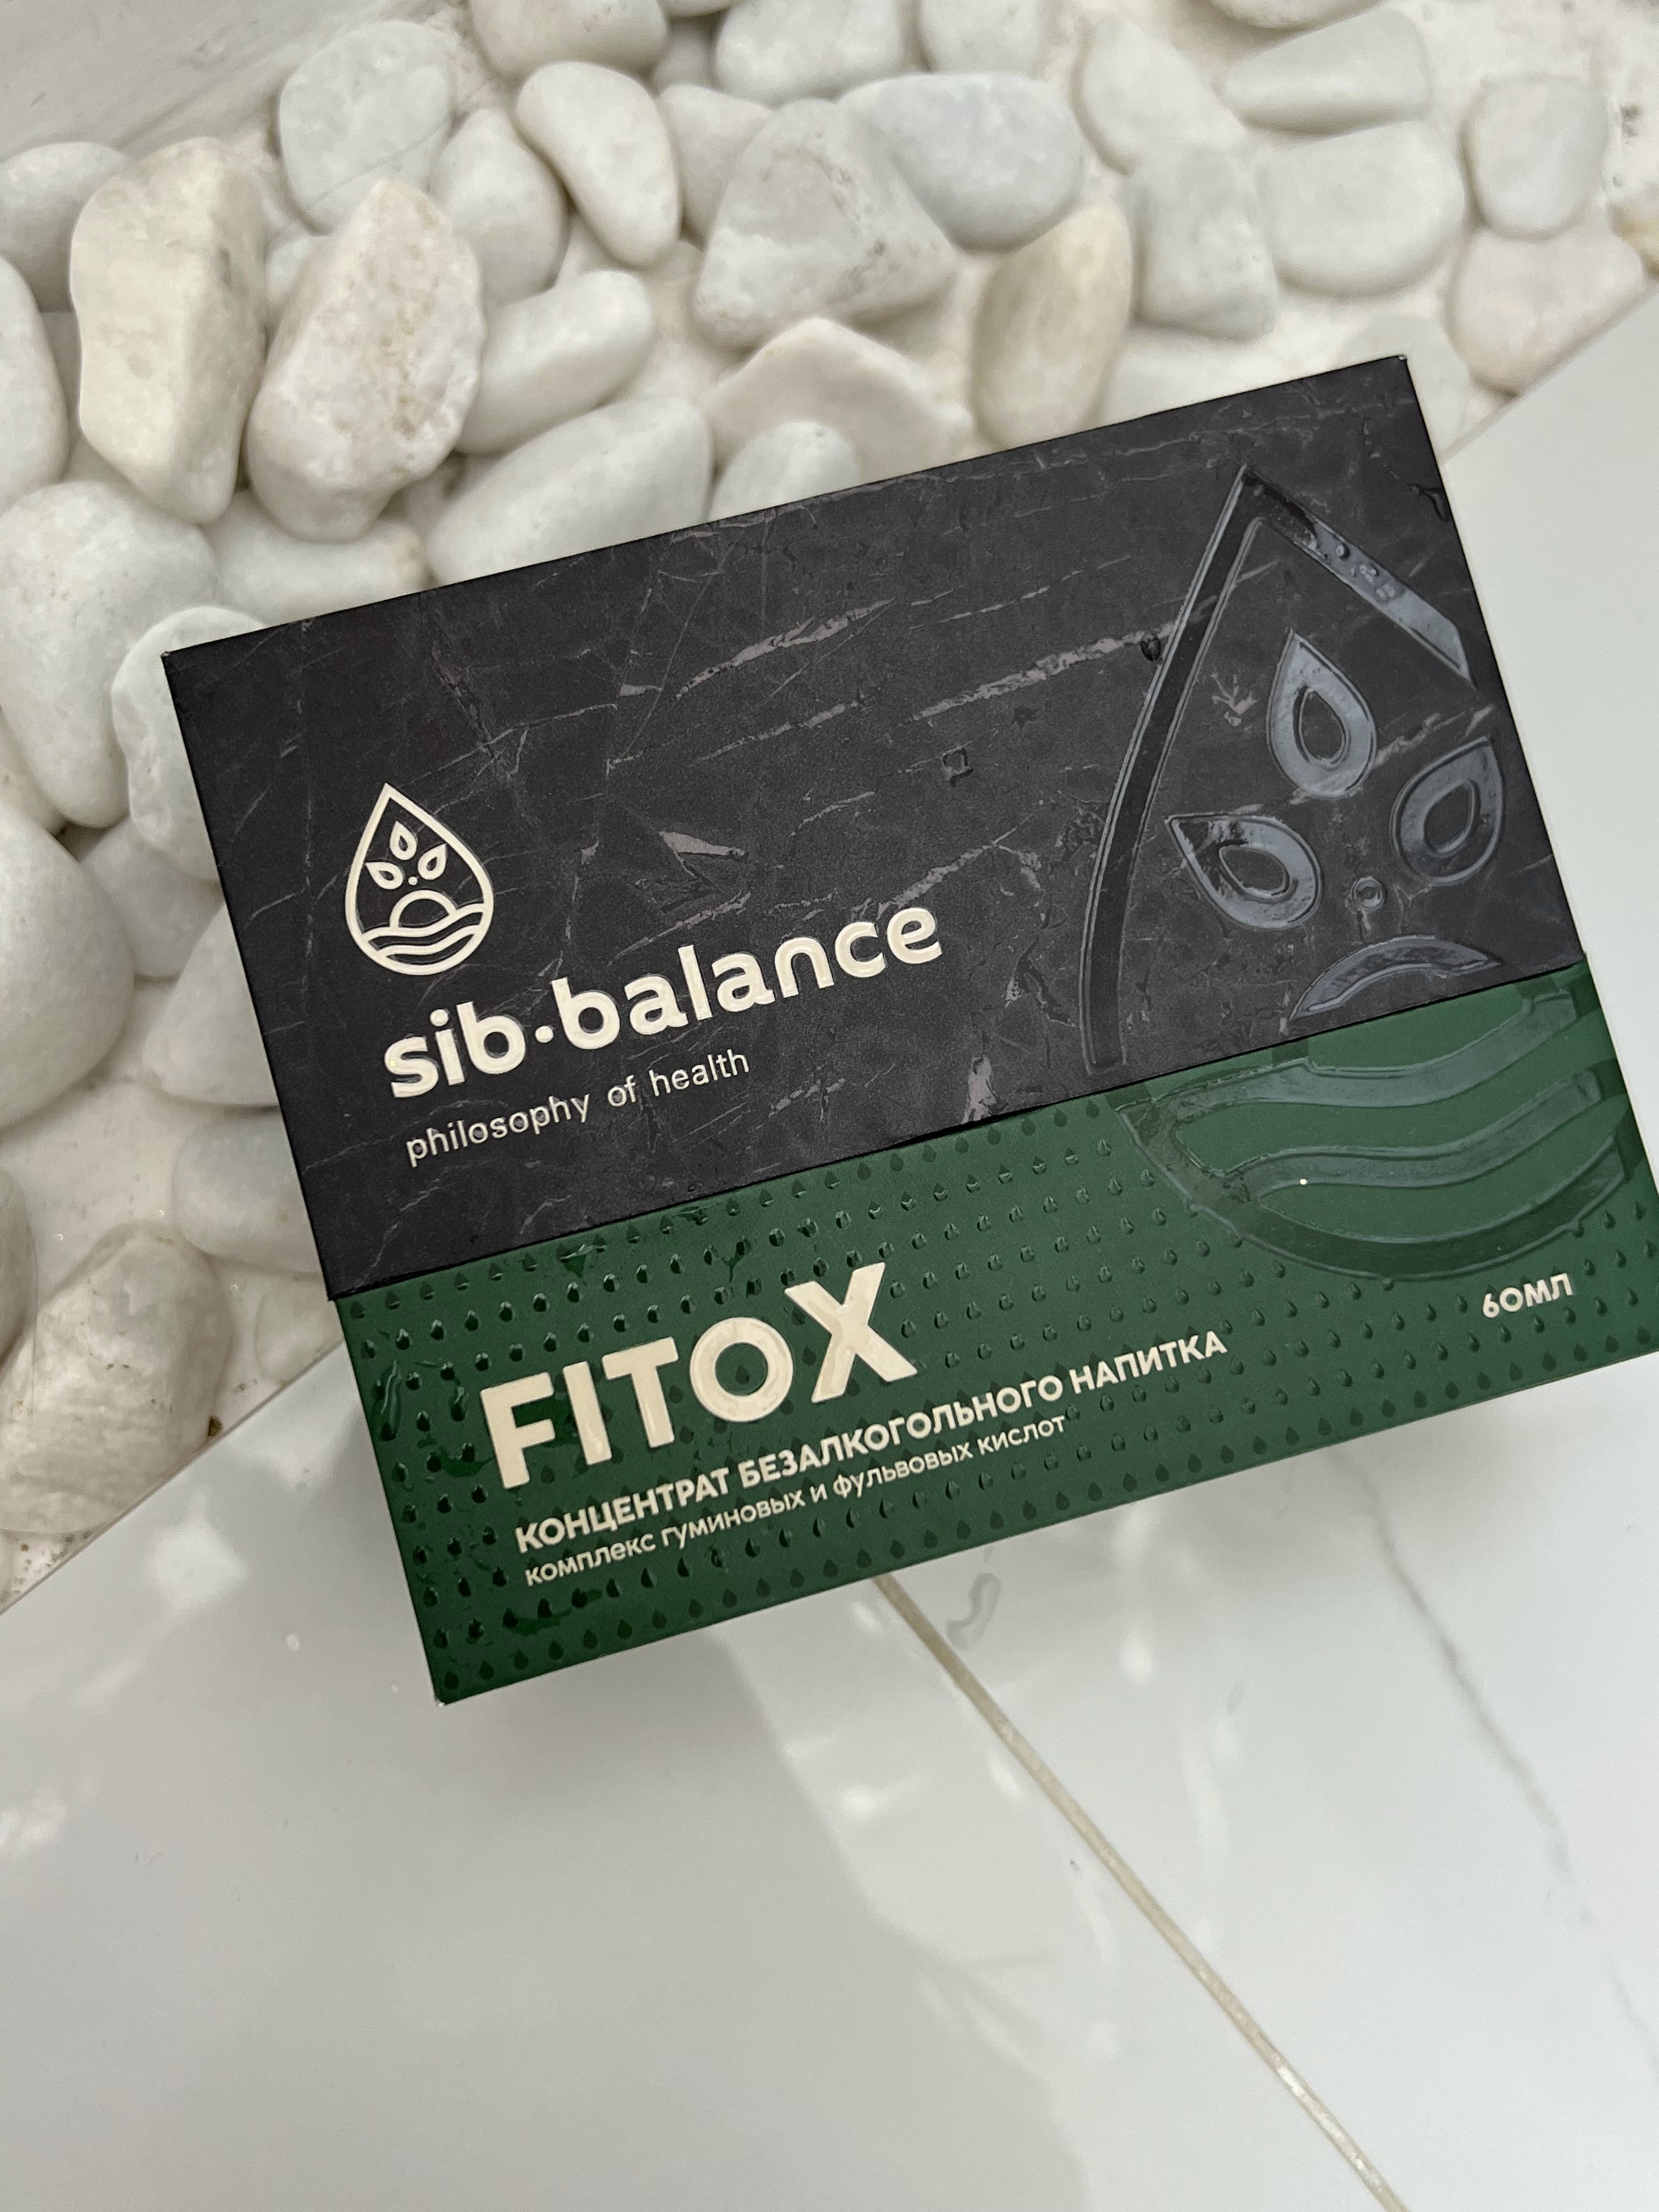 FITOX